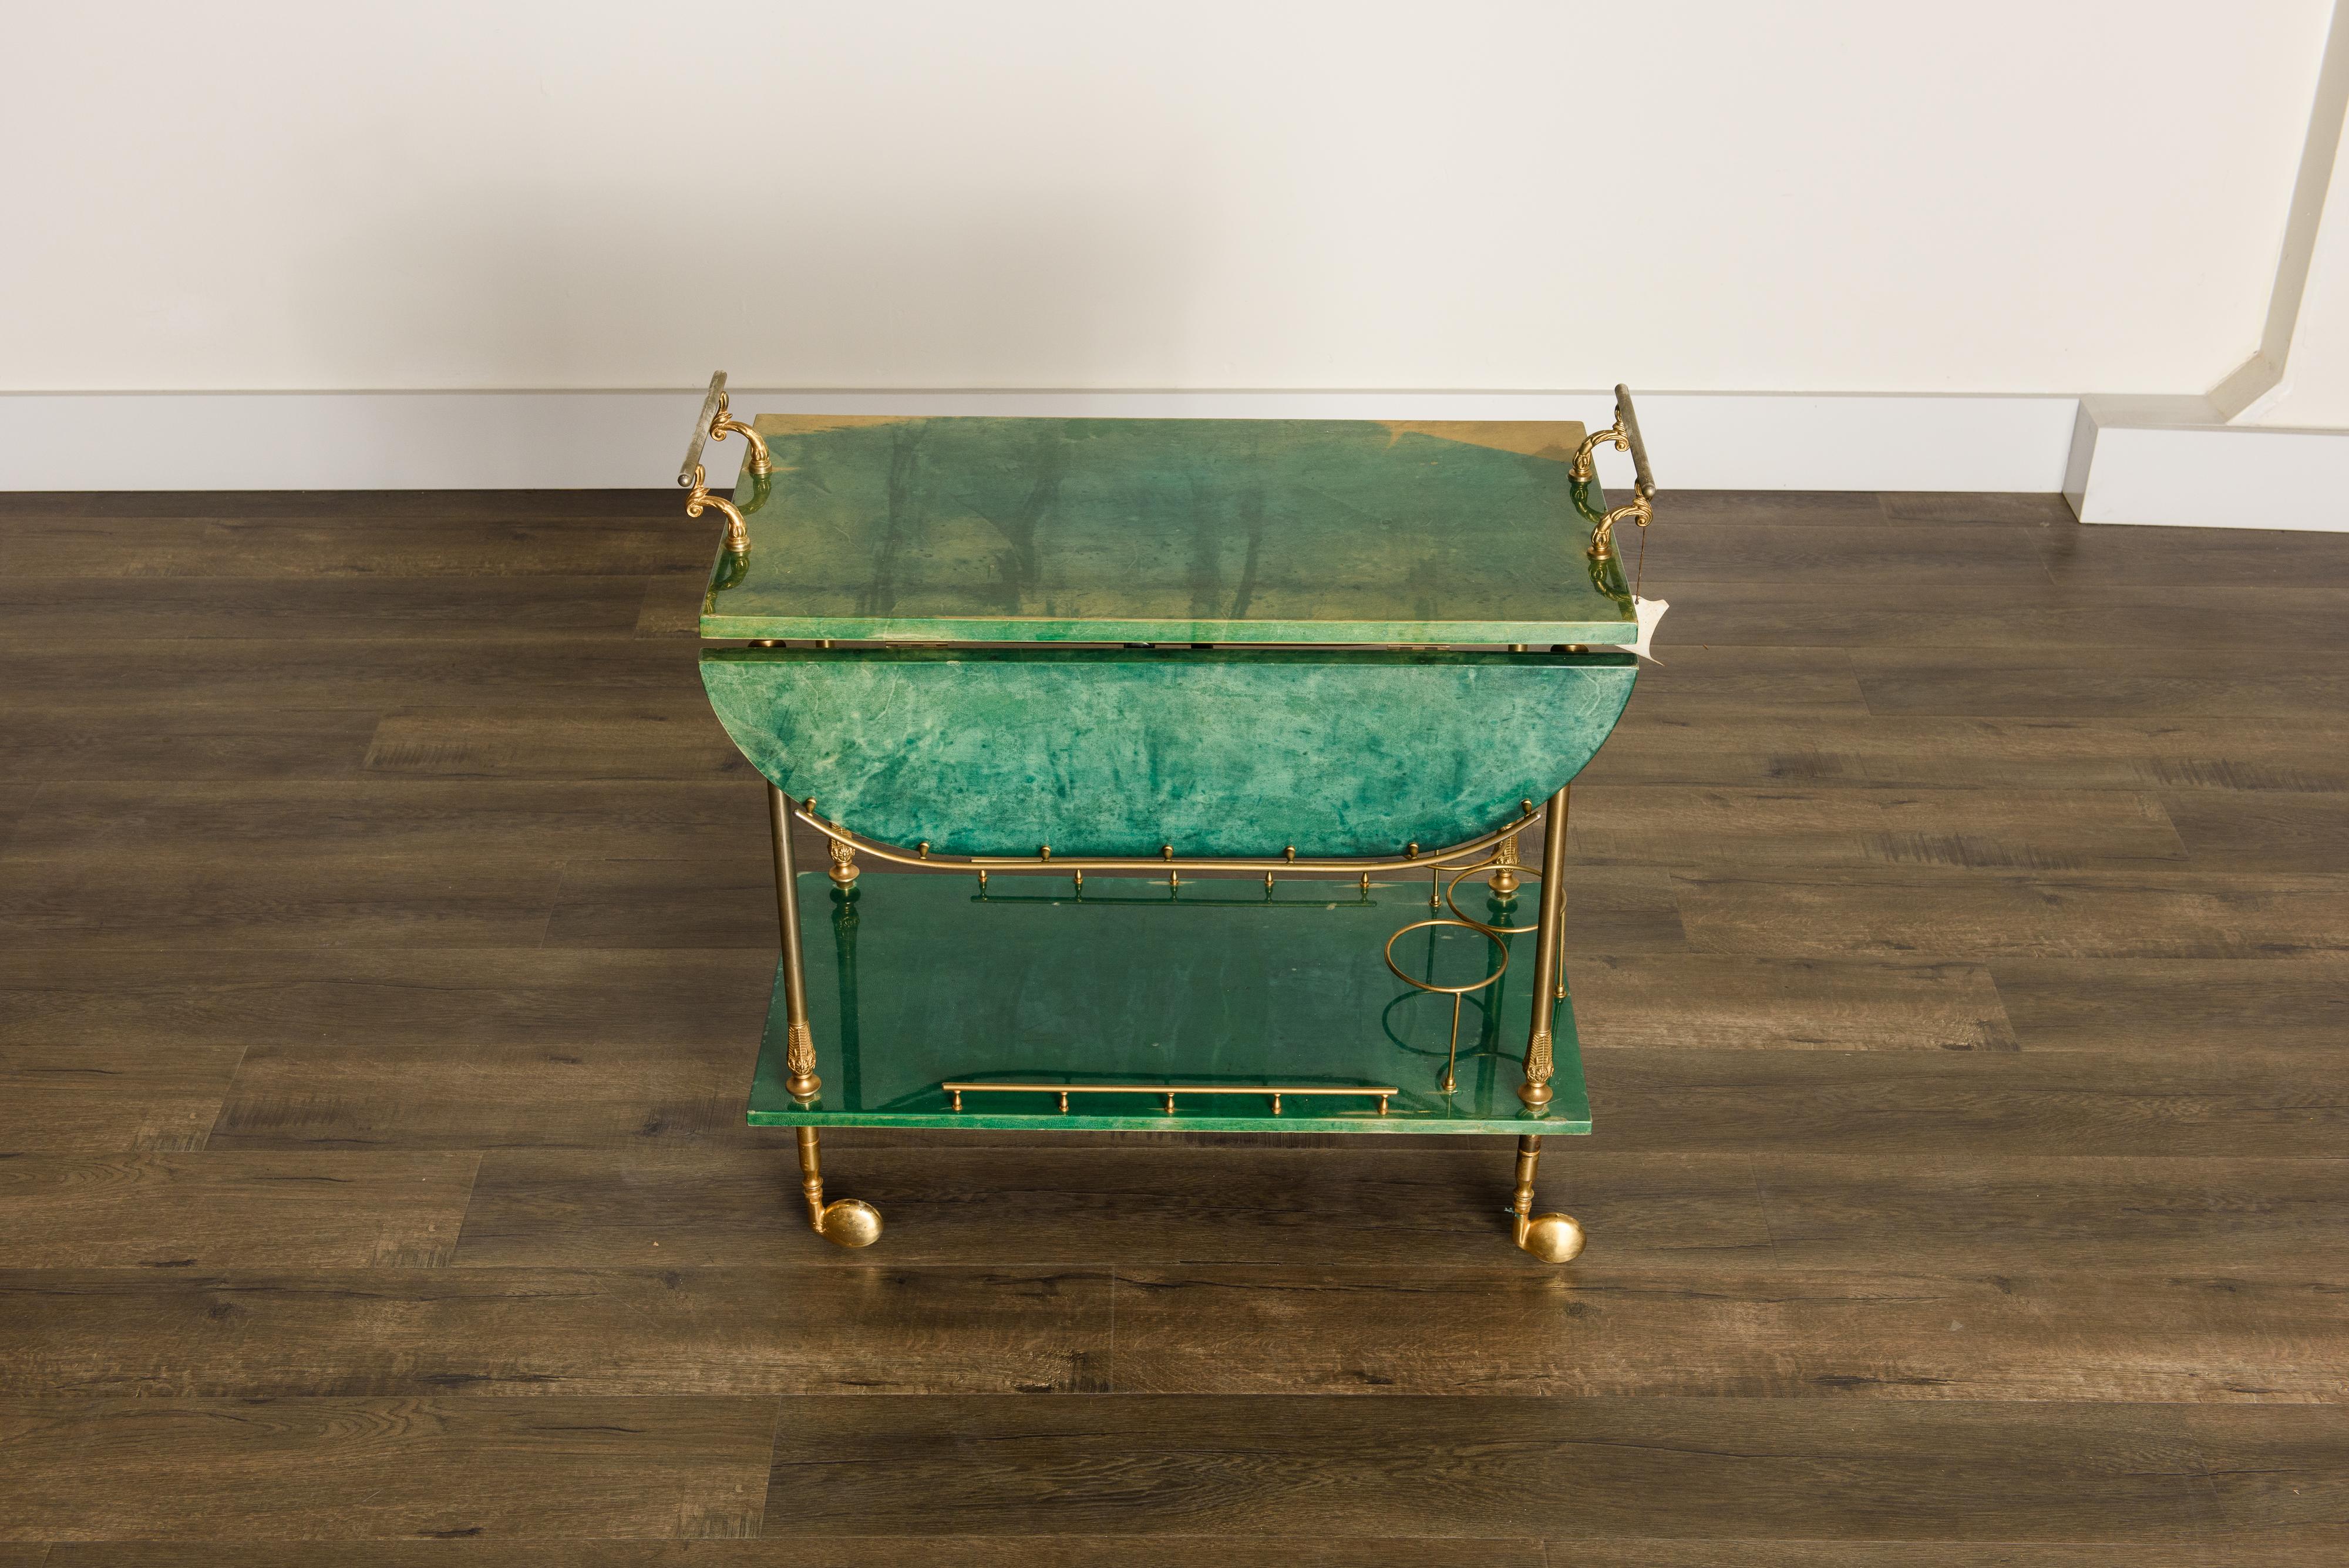 Beautiful emerald green bar cart by Italian artist-craftsman Aldo Tura, featuring the designers distinct use of brass and lacquered goatskin that Tura was well-known for. The quality of Aldo Tura's craftsmanship is due to the fact that his work was